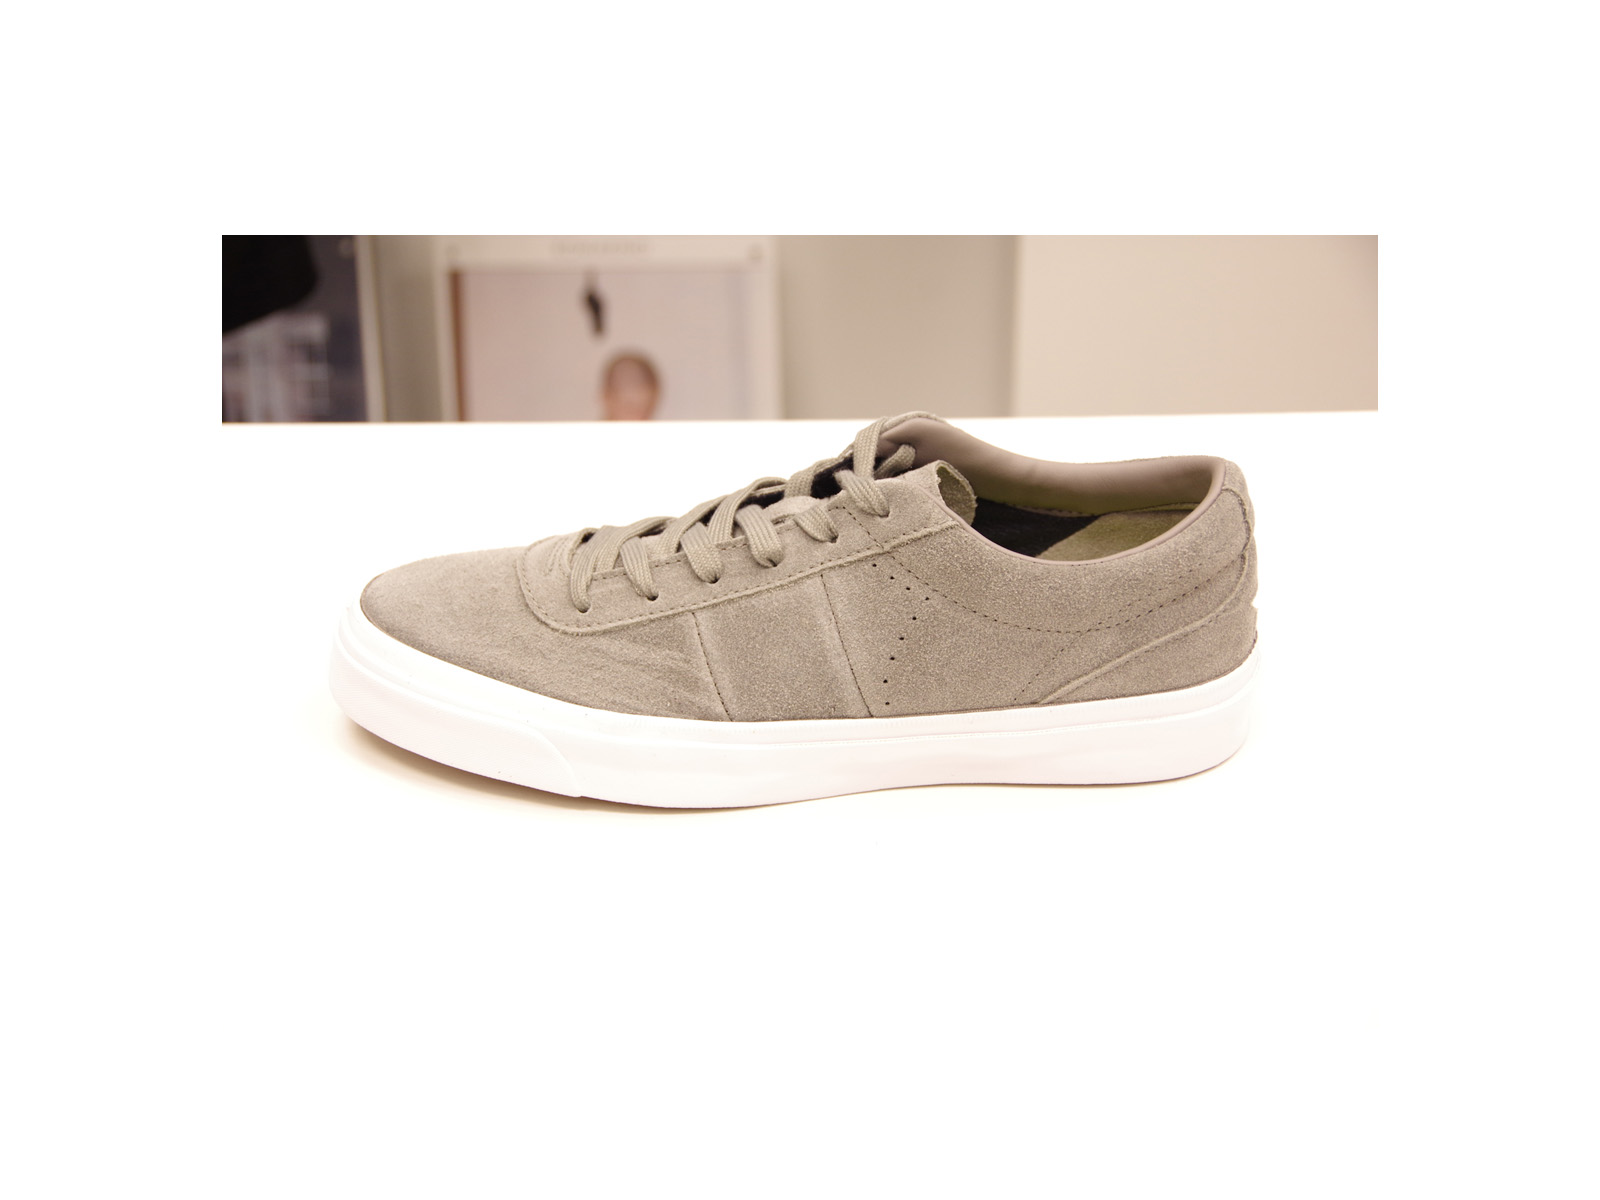 NEW ARRIVALS – CONVERSE ONE STAR CC OX